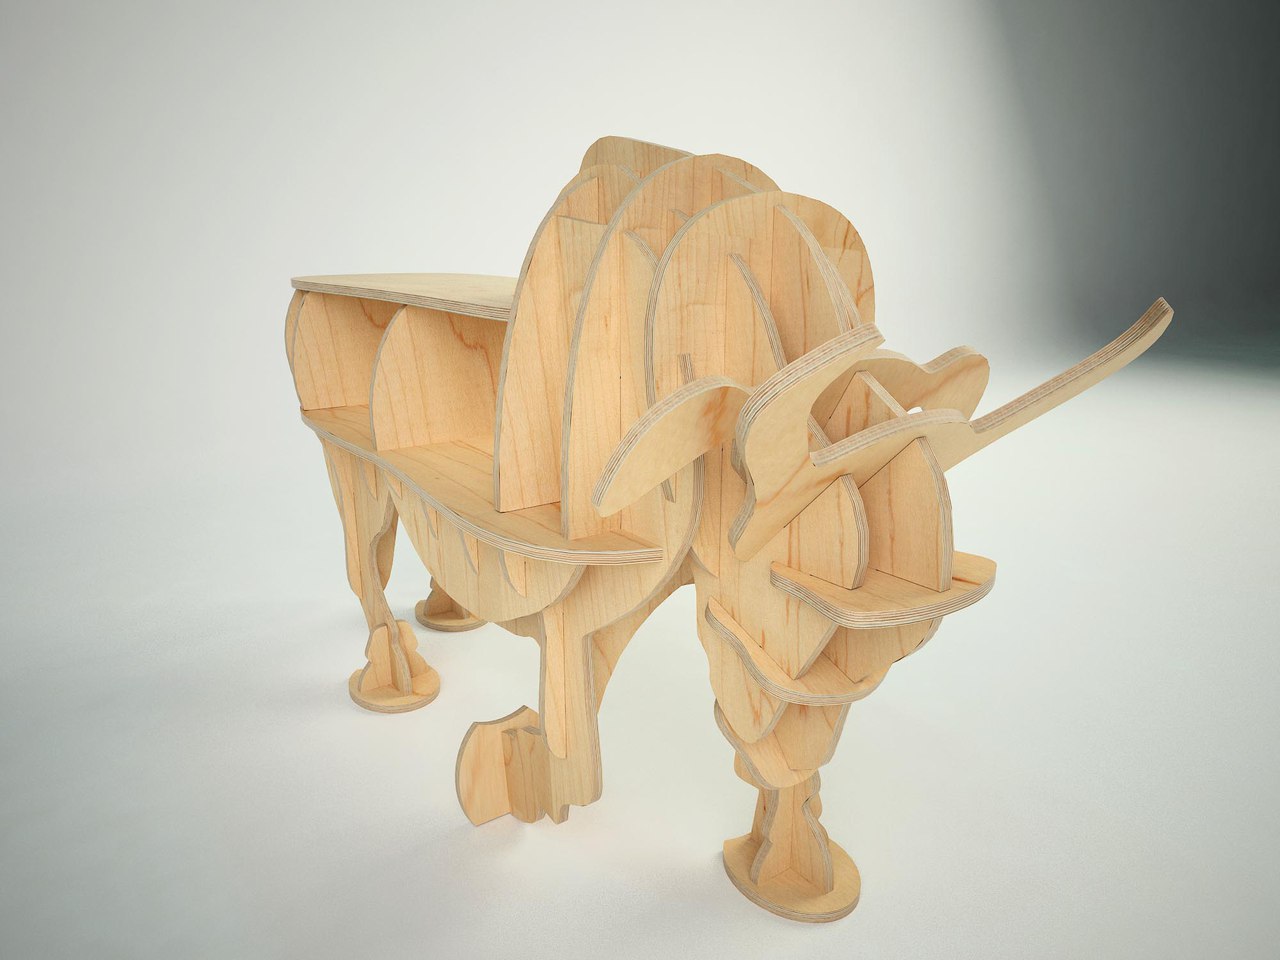 Laser Cut Bull 3D Wooden Puzzle Free Vector